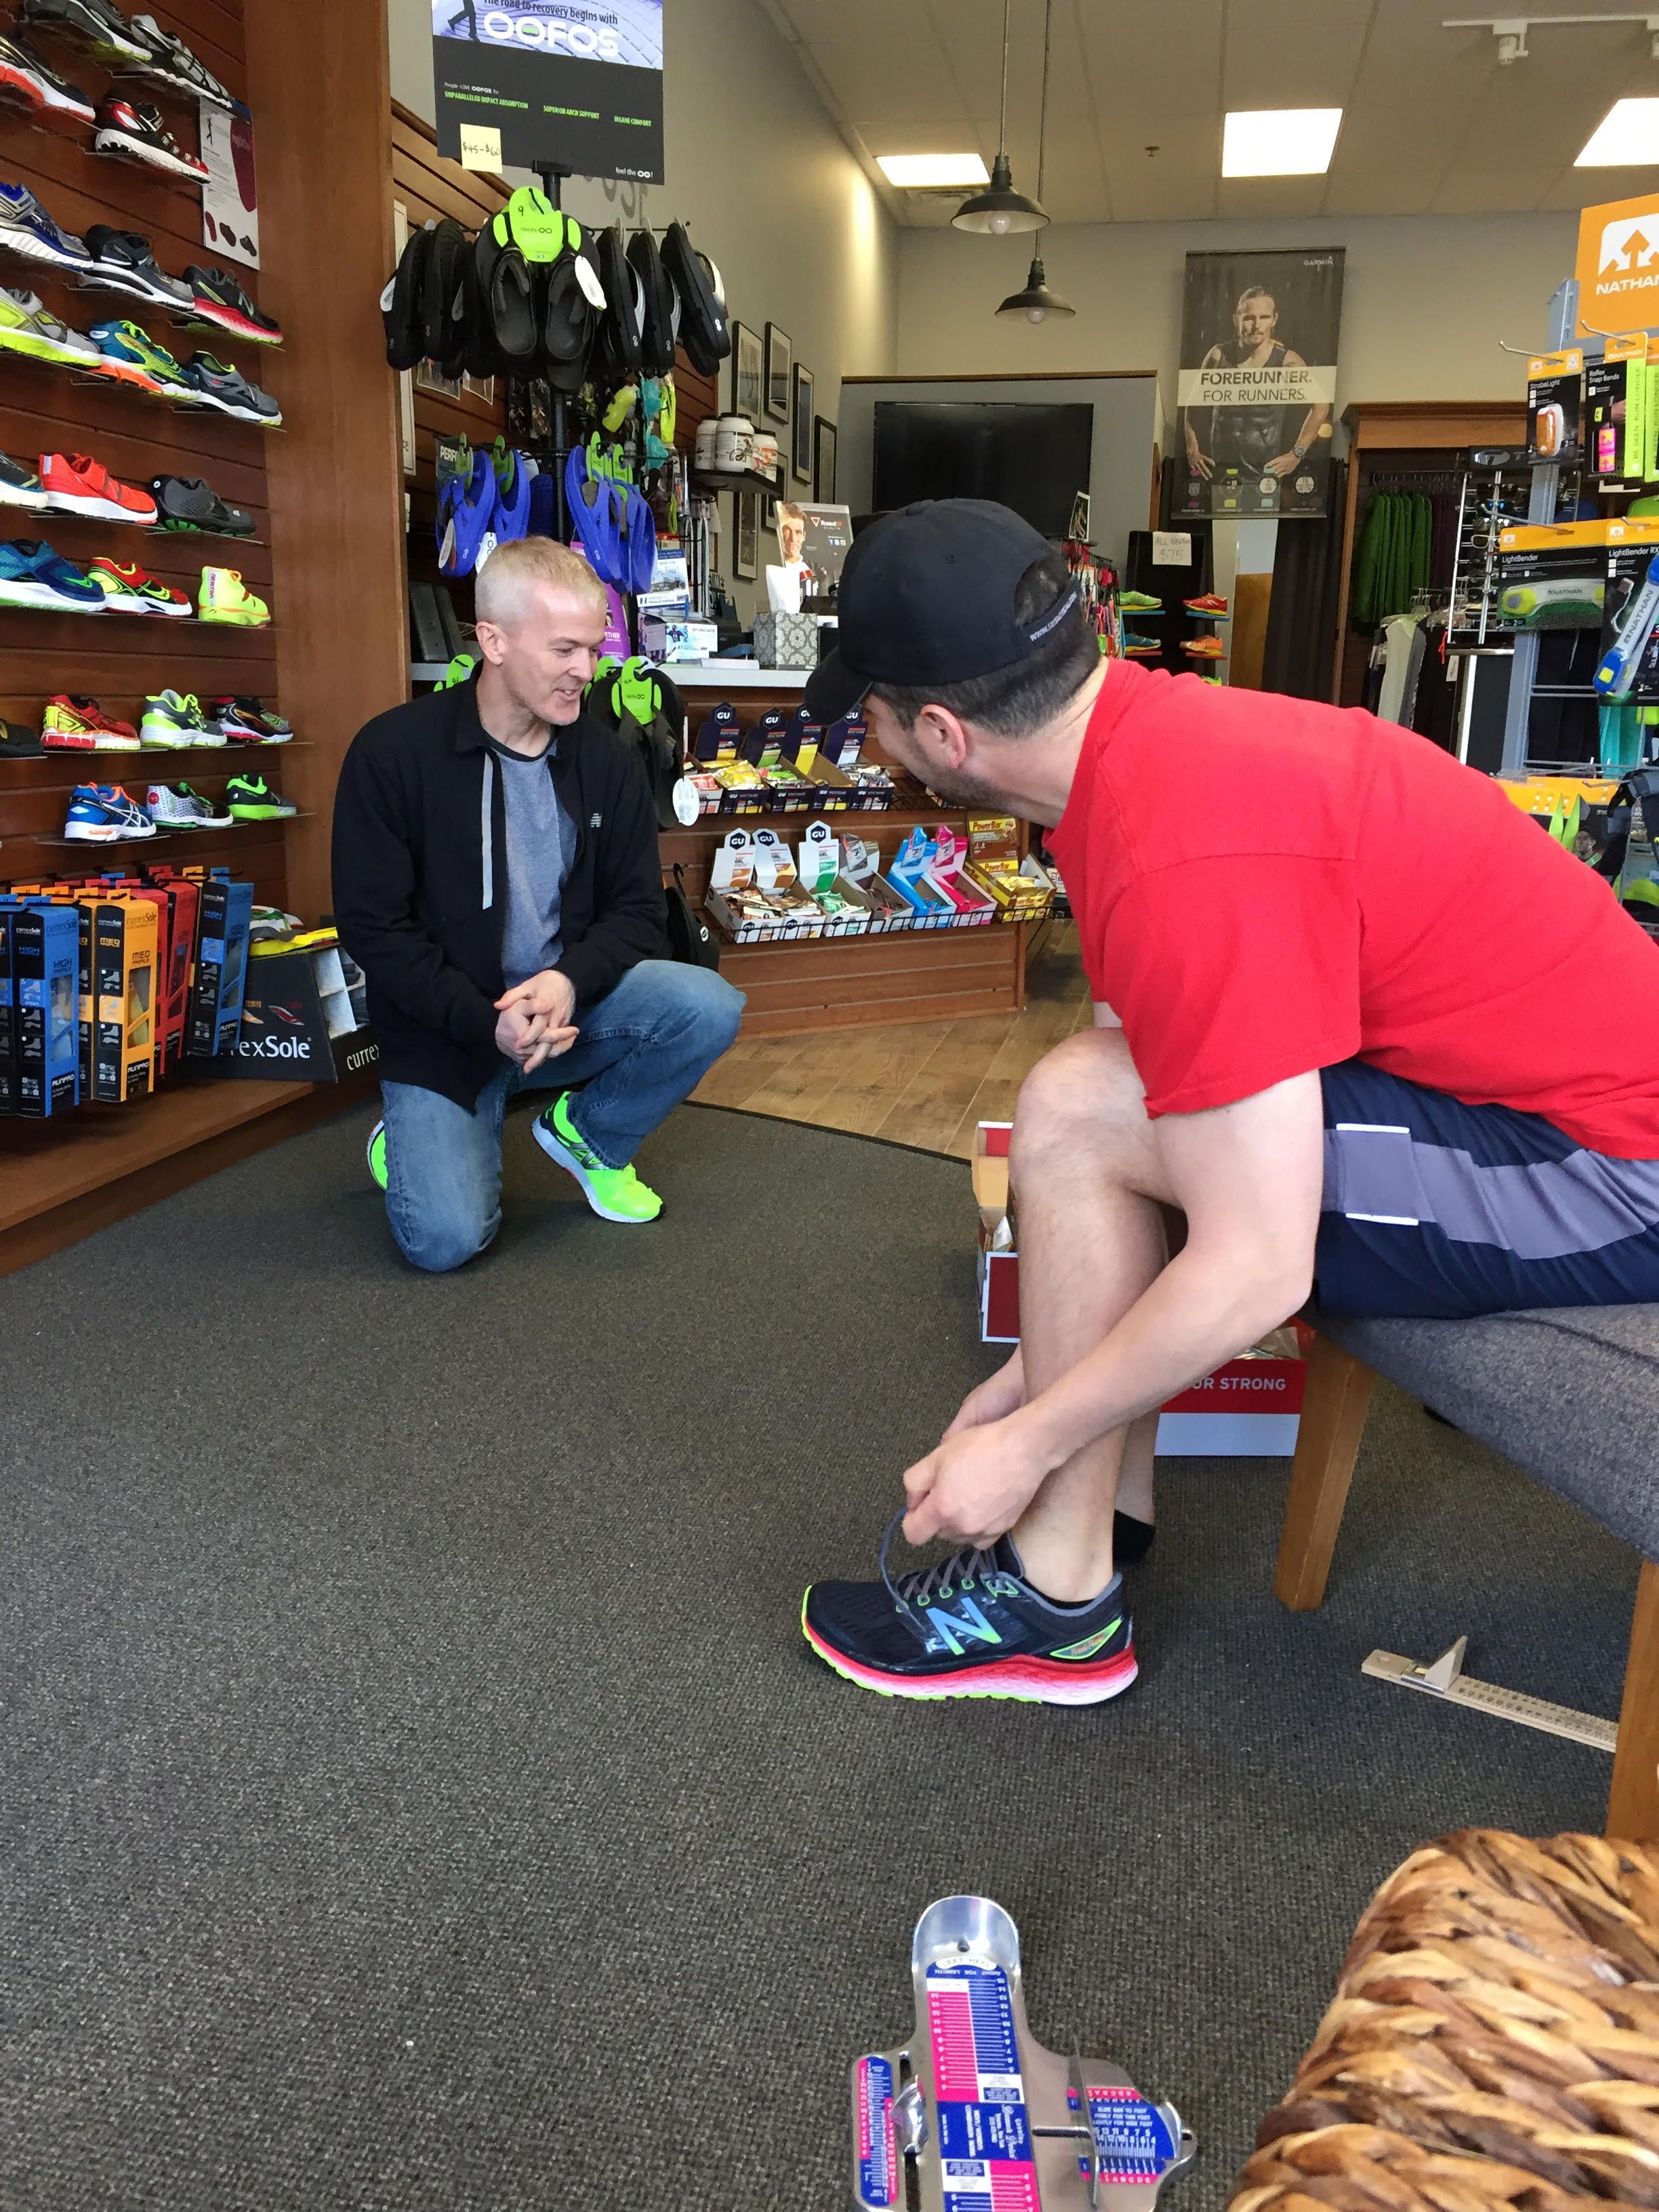 Doctors and Running Stores Work Together Fit - Finding Perfect Running Shoe Fit